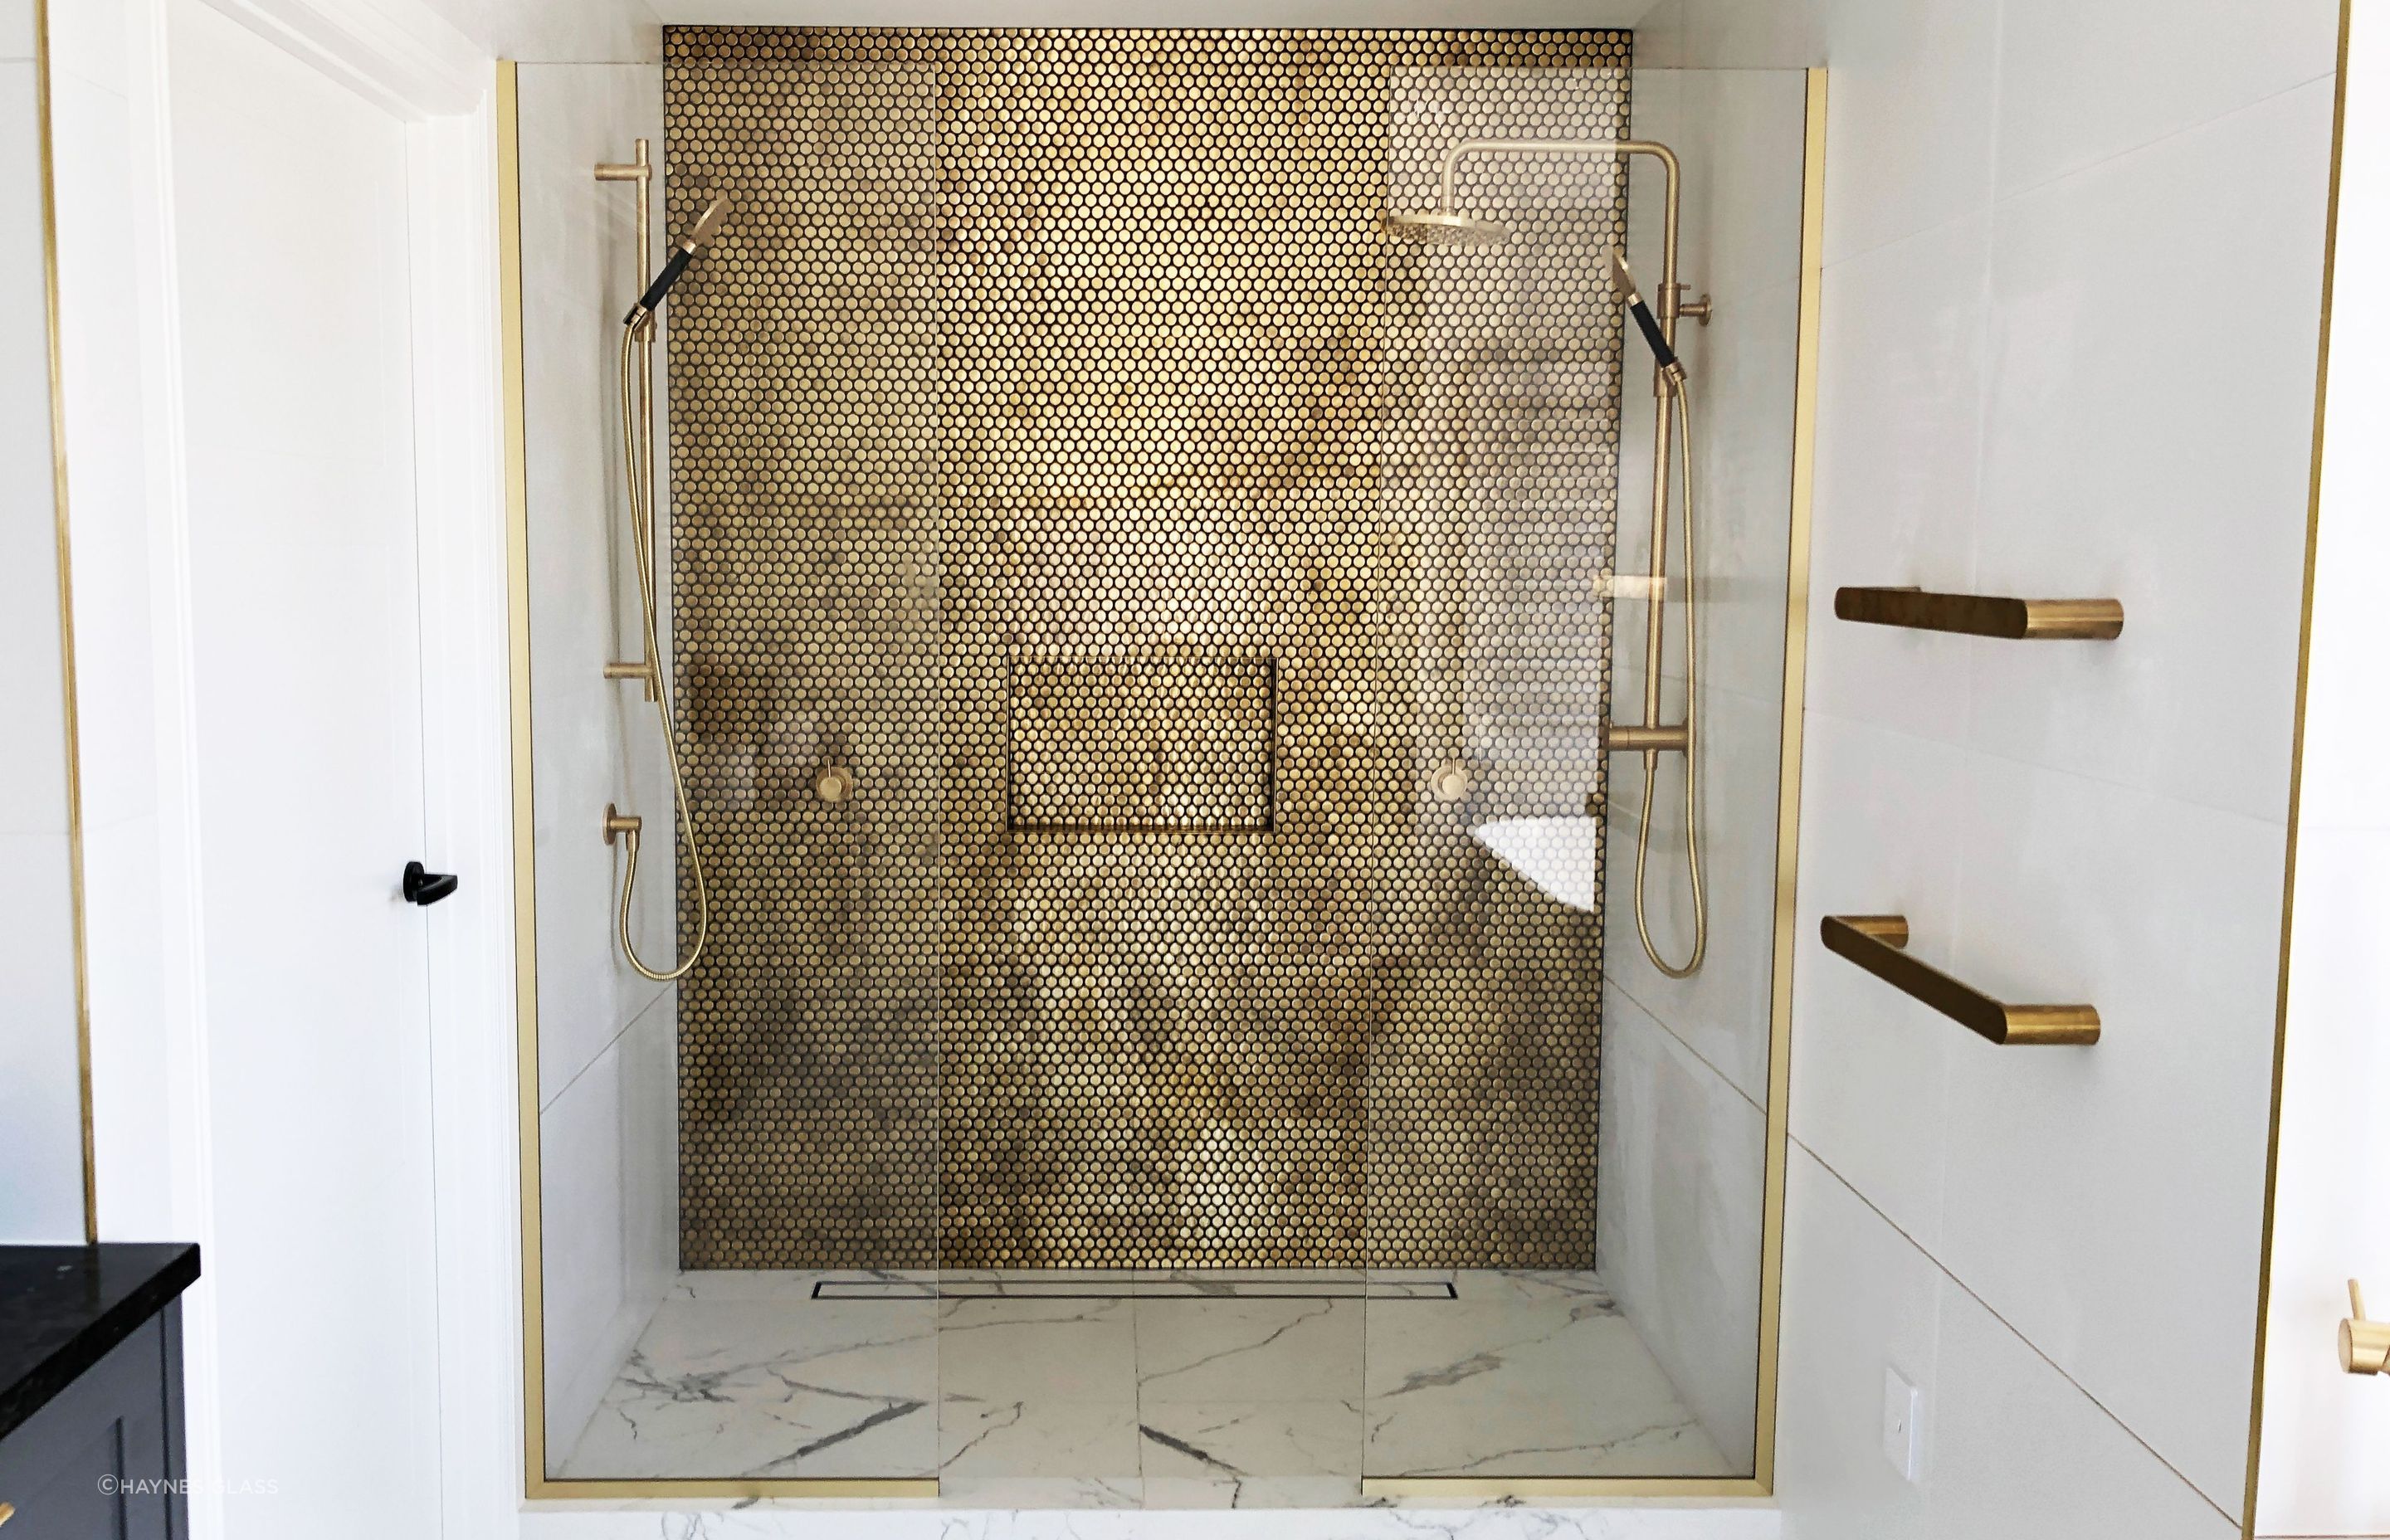 This fixed panel shower glass features gold hardware to match other gold fixtures in the bathroom.